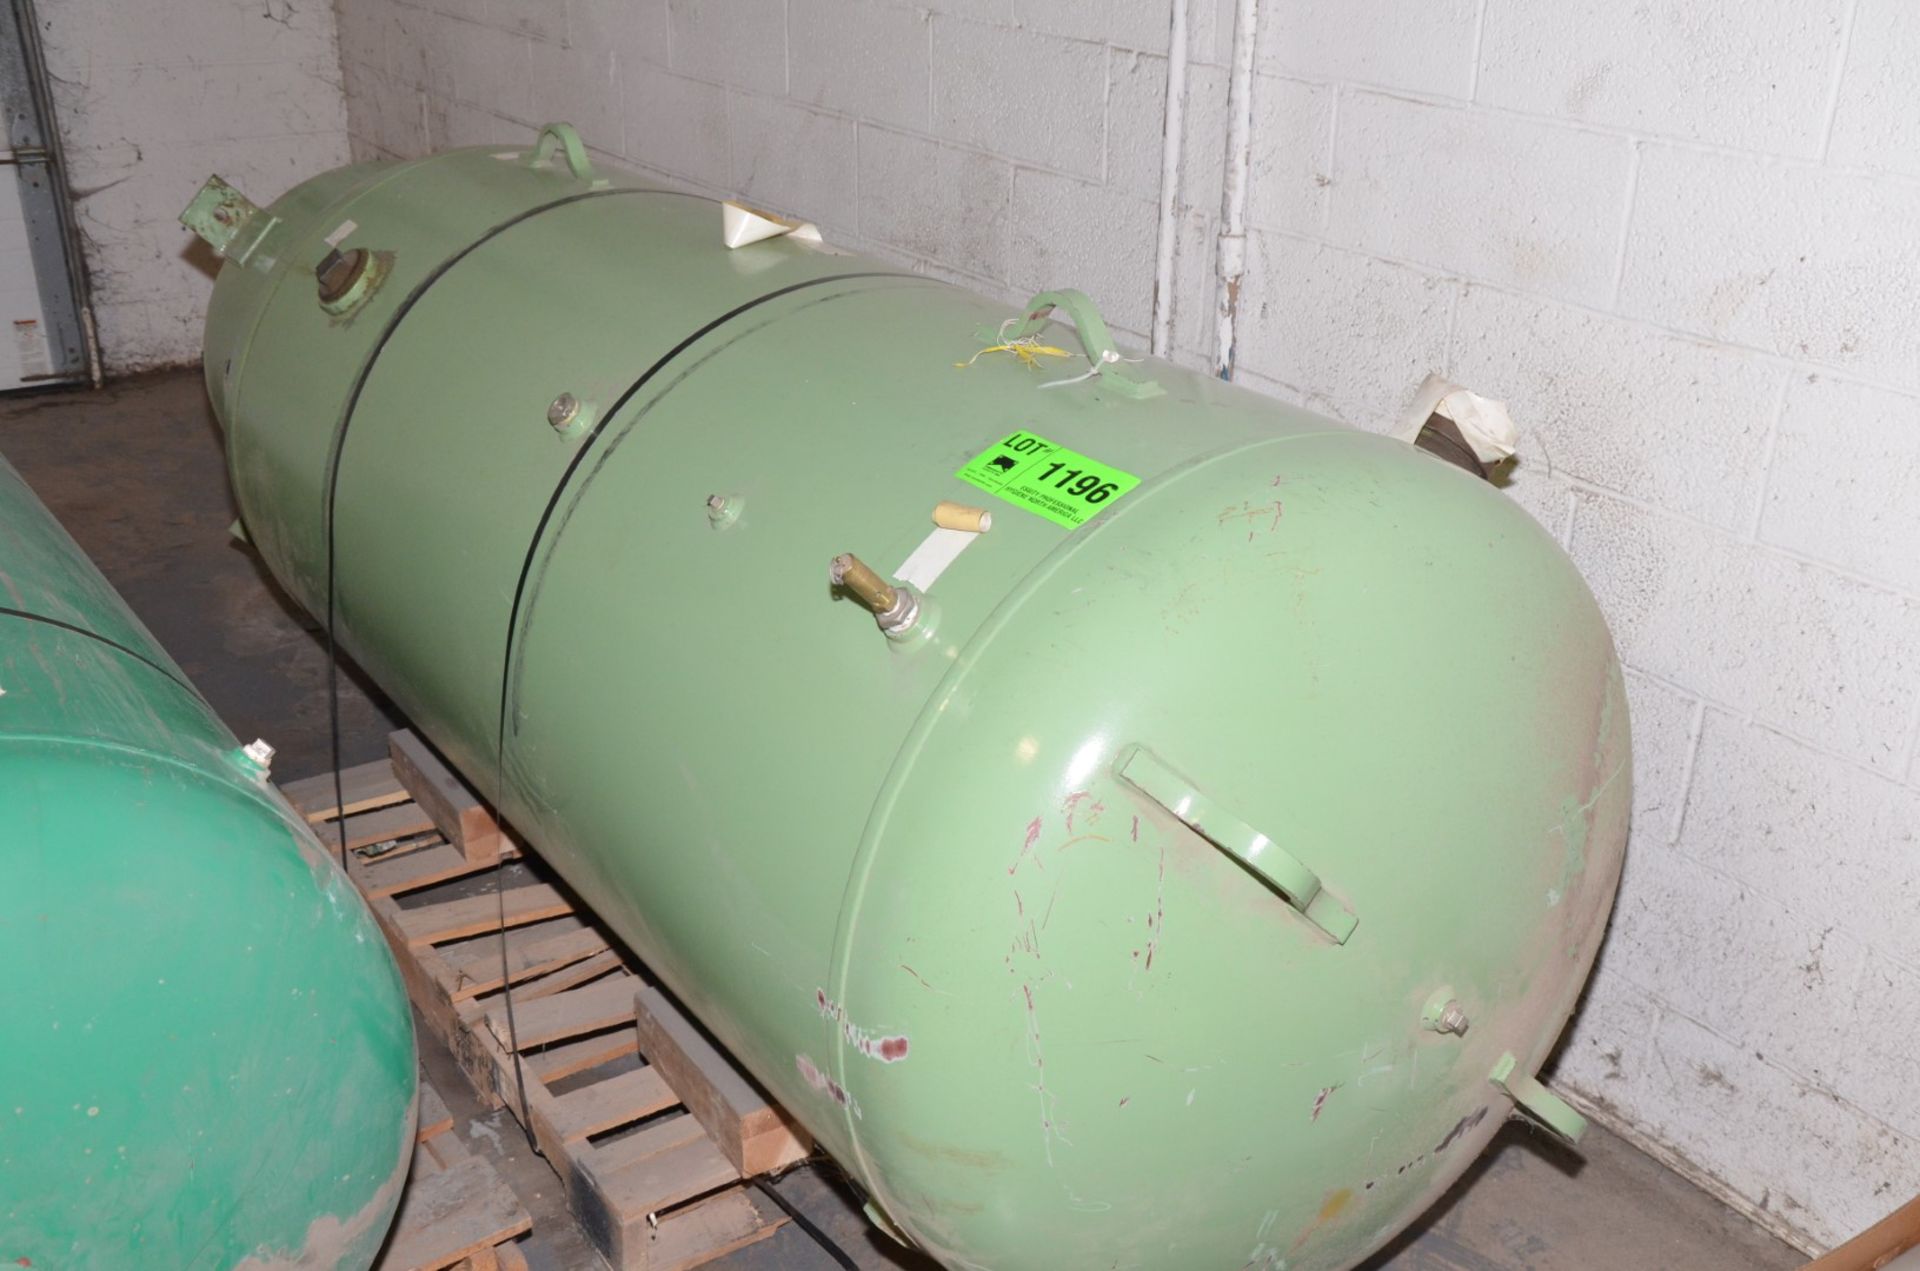 AIR RECEIVER TANK [RIGGING FEE FOR LOT #1196 - $50 USD PLUS APPLICABLE TAXES]